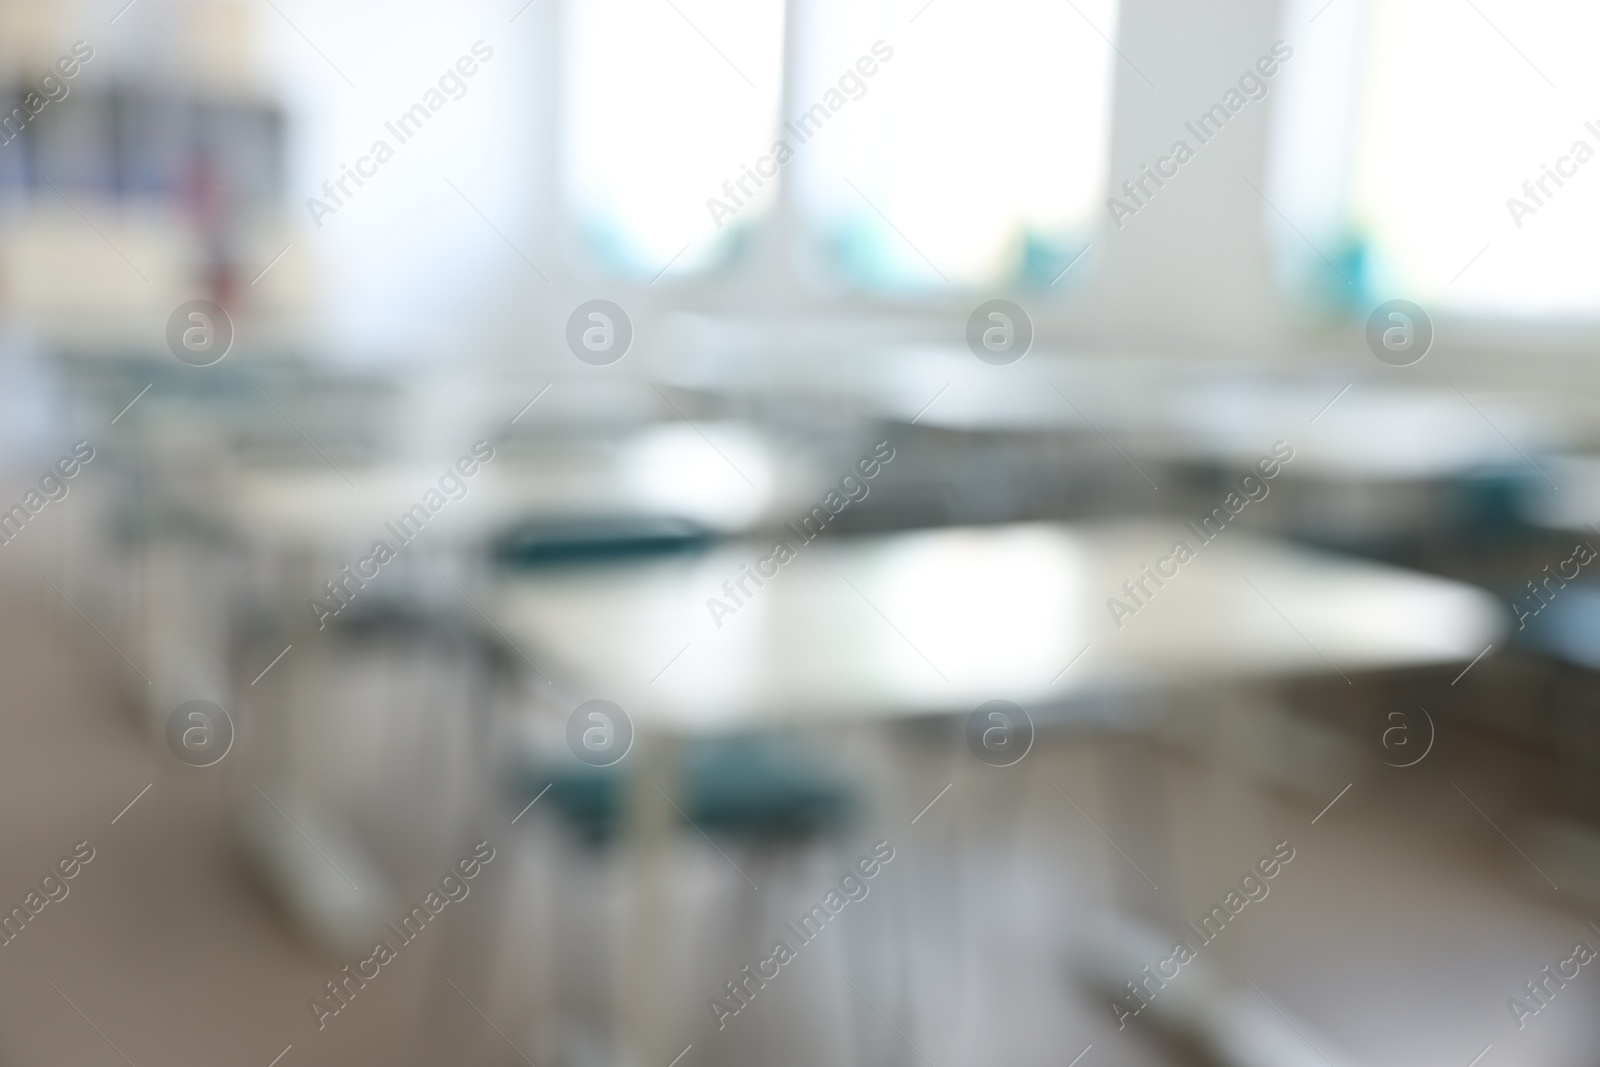 Photo of Blurred view of empty school classroom with desks, windows and chairs